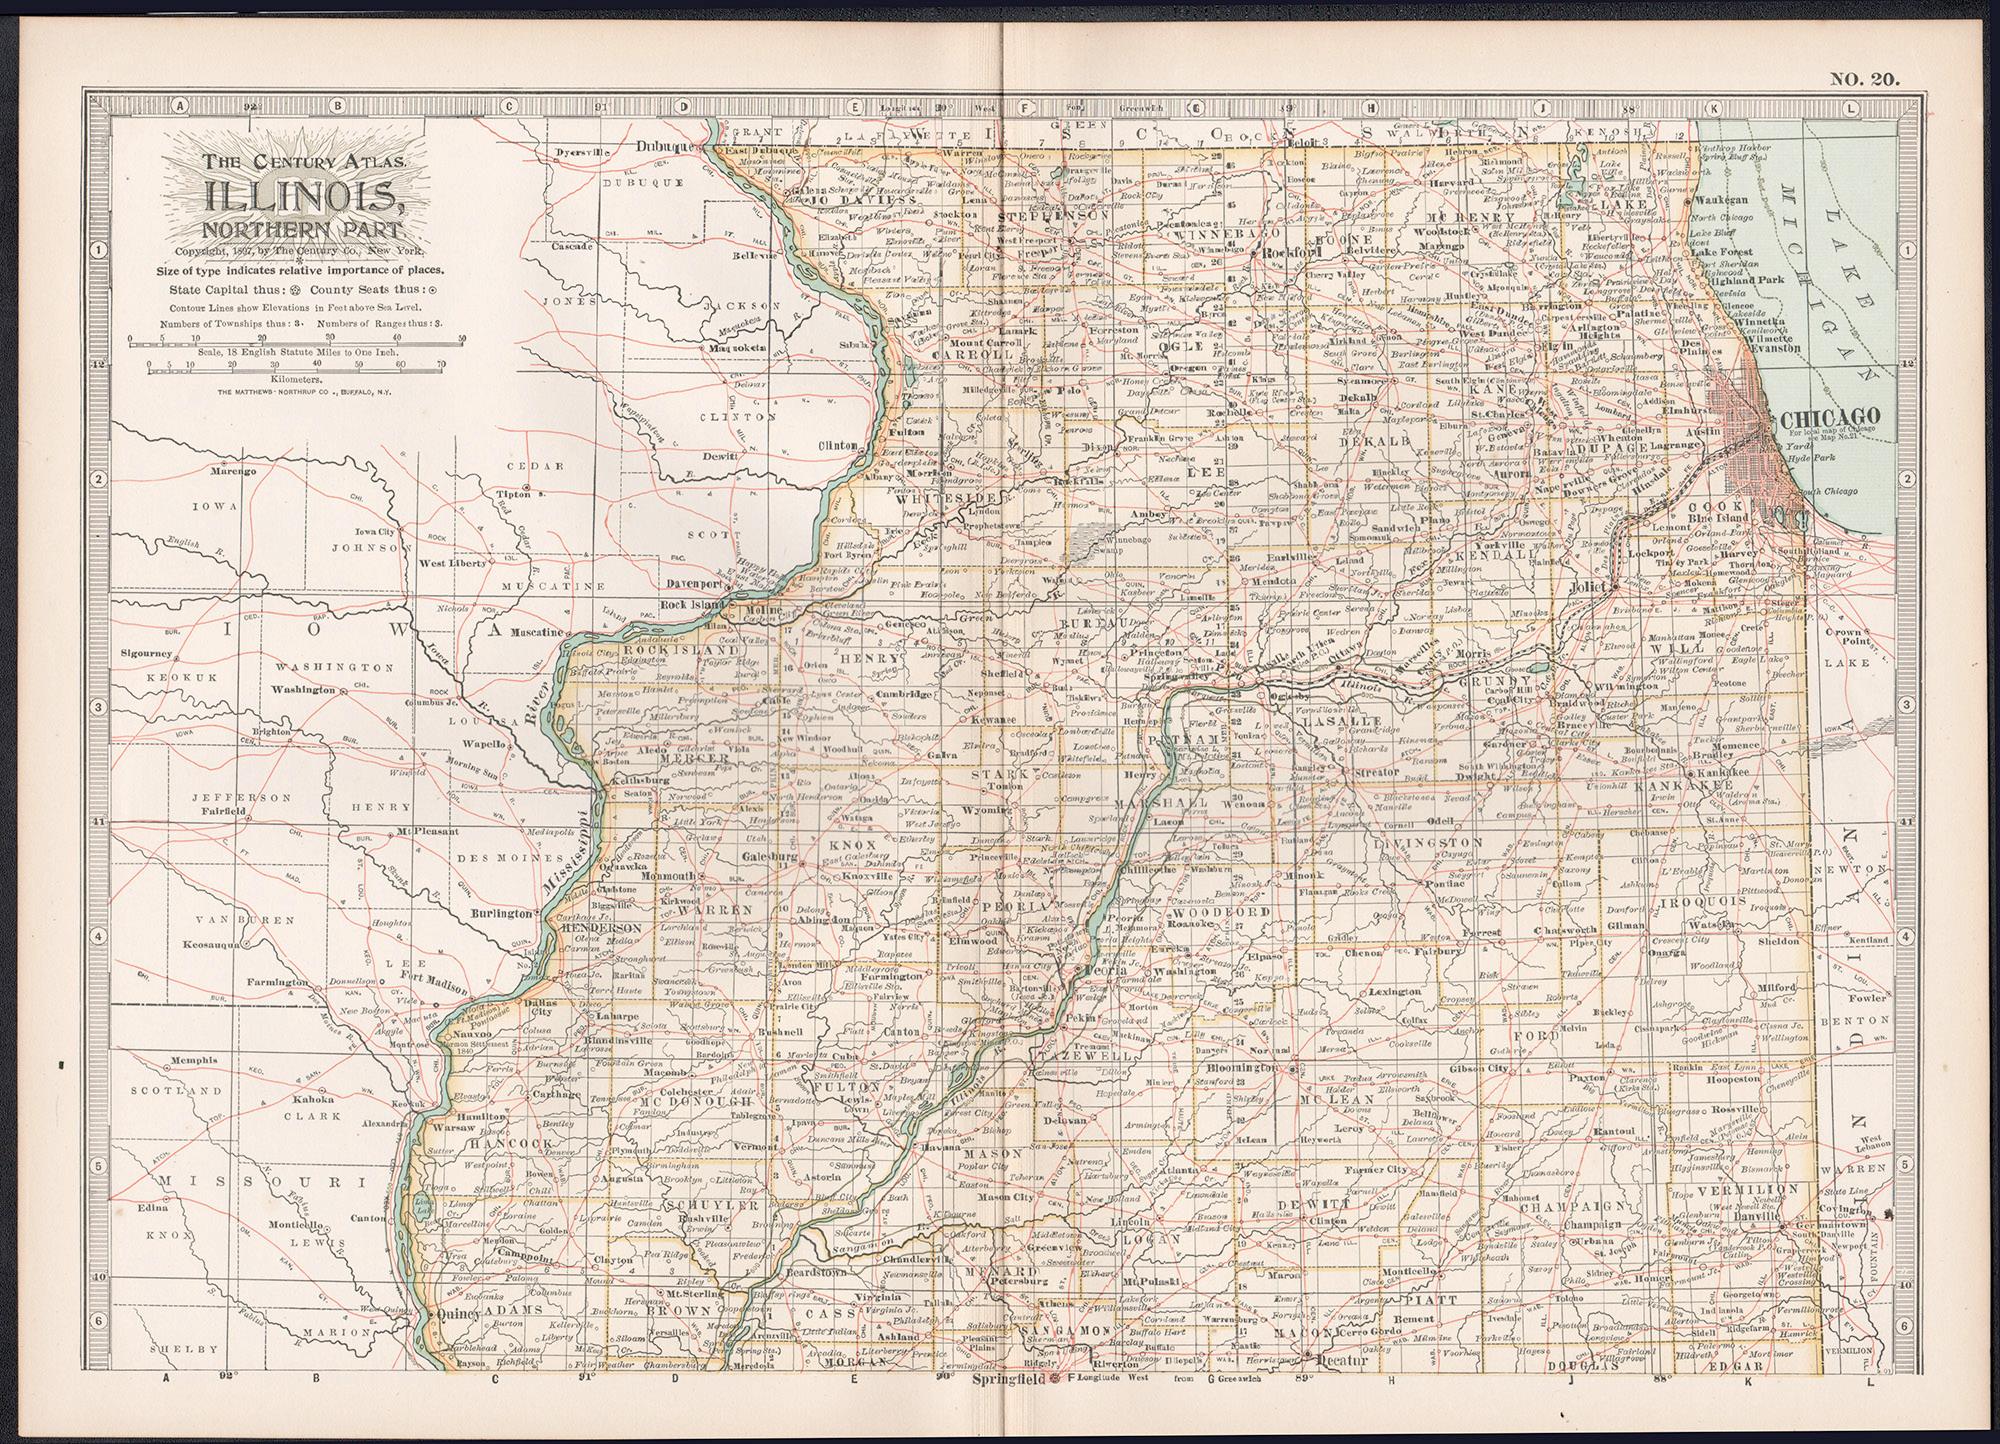 Illinois, Northern Part. USA. Century Atlas state antique vintage map - Print by Unknown